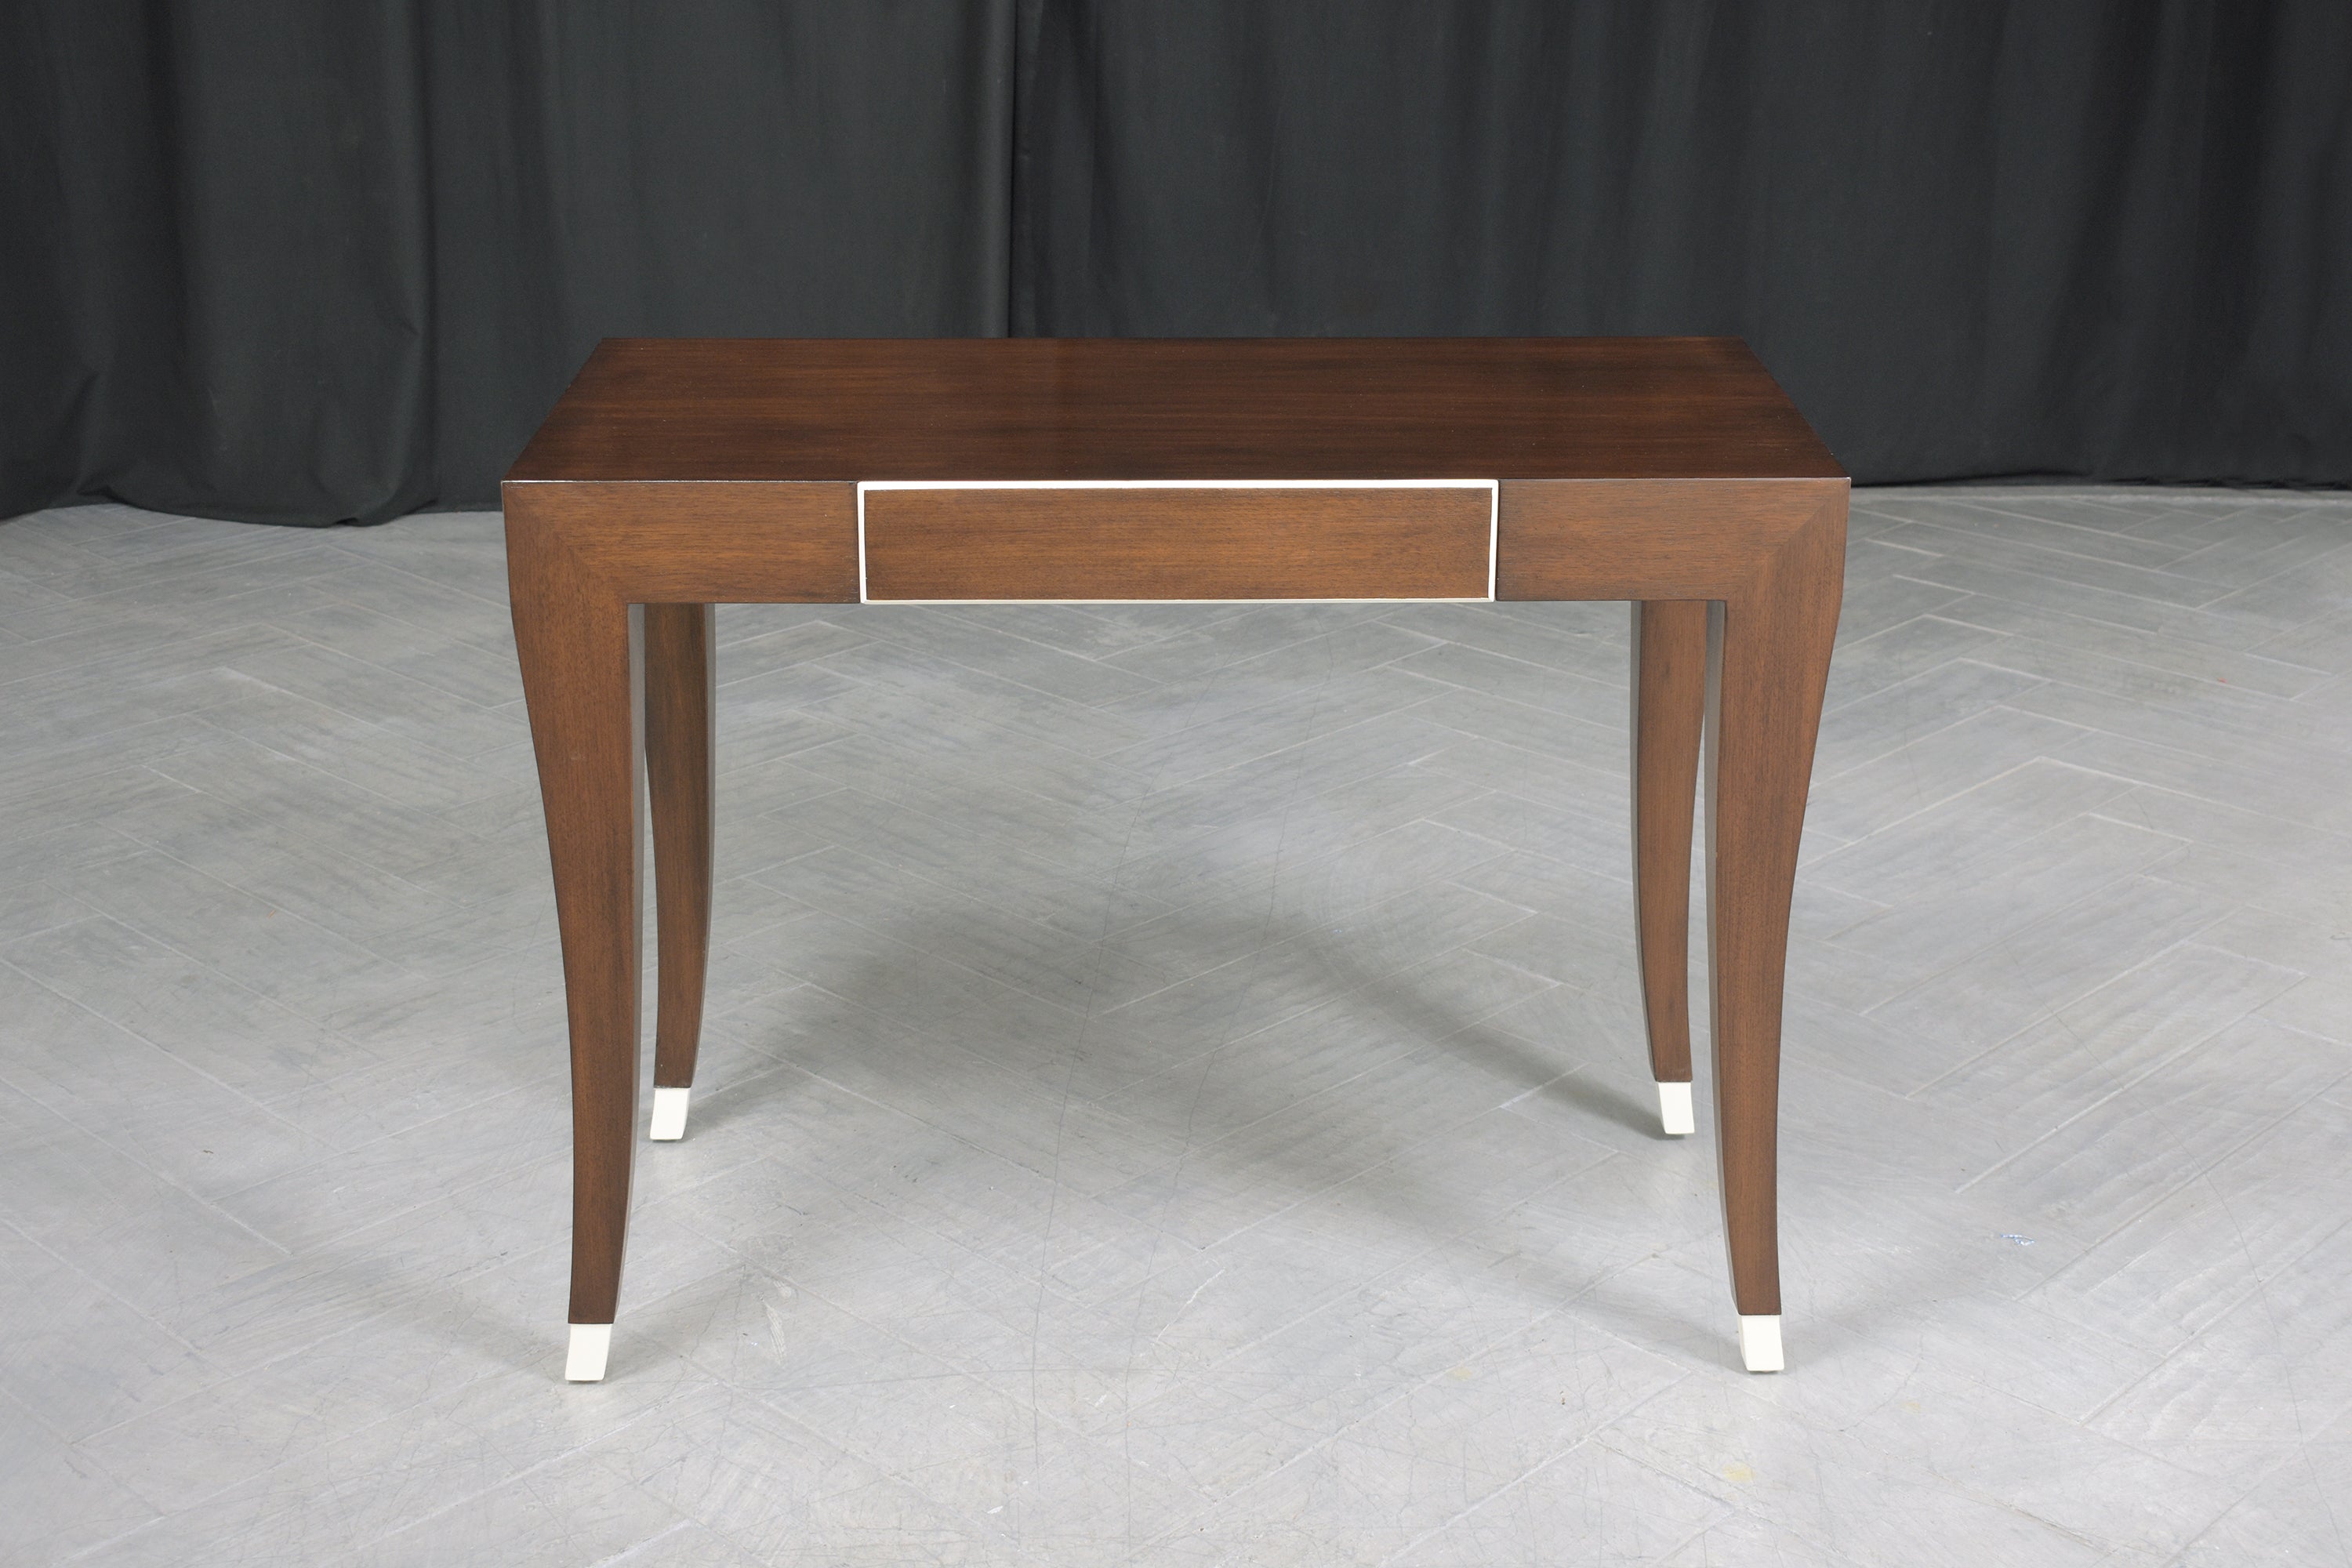 This extraordinary mid-century modern writing table is hand-crafted out of mahogany wood and is in great condition has been completely restored and refinished by our professional expert craftsman team in the house. This executive desk is sleek and